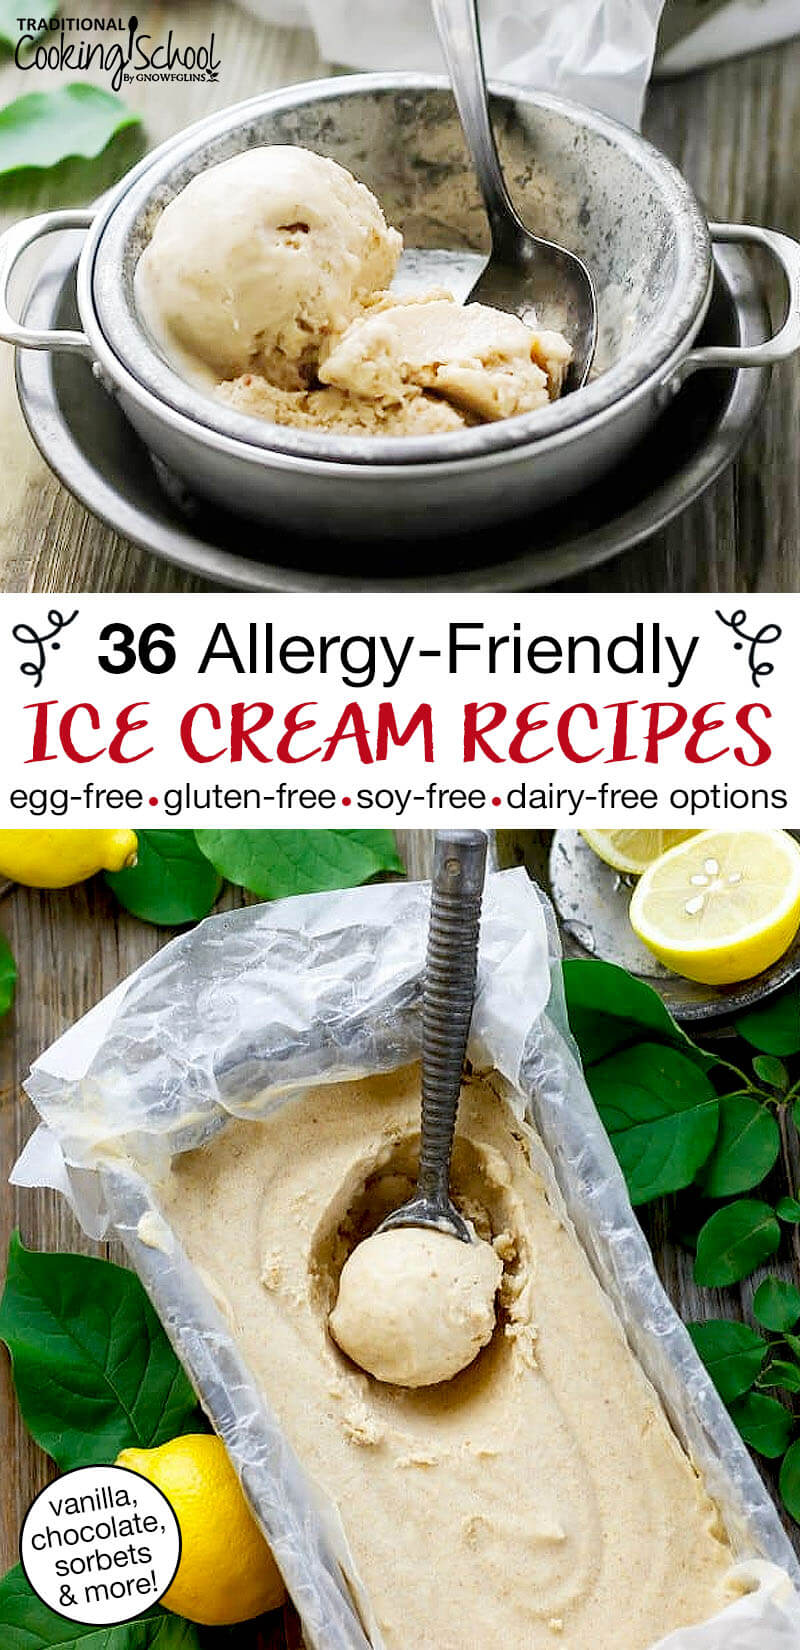 photo collage of brightly colored bowls of ice cream, with text overlay: "36 Allergy-Friendly Ice Cream Recipes (egg-free, gluten-free, soy-free, dairy-free options) (vanilla, chocolate, sorbets & more!)"